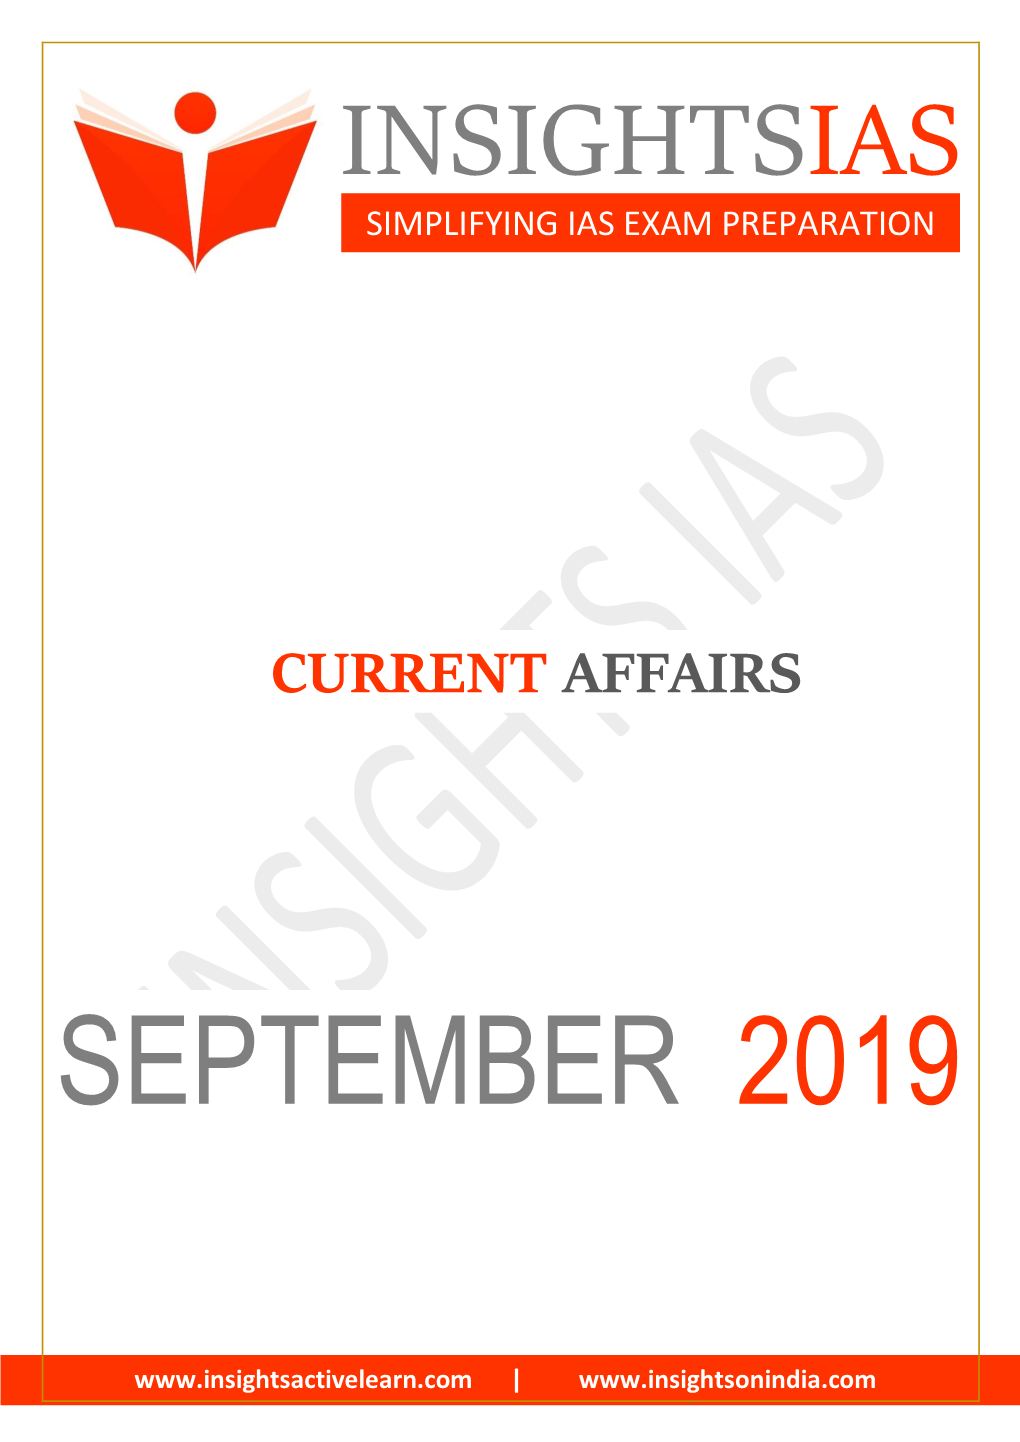 Insights September 2019 Current Affairs